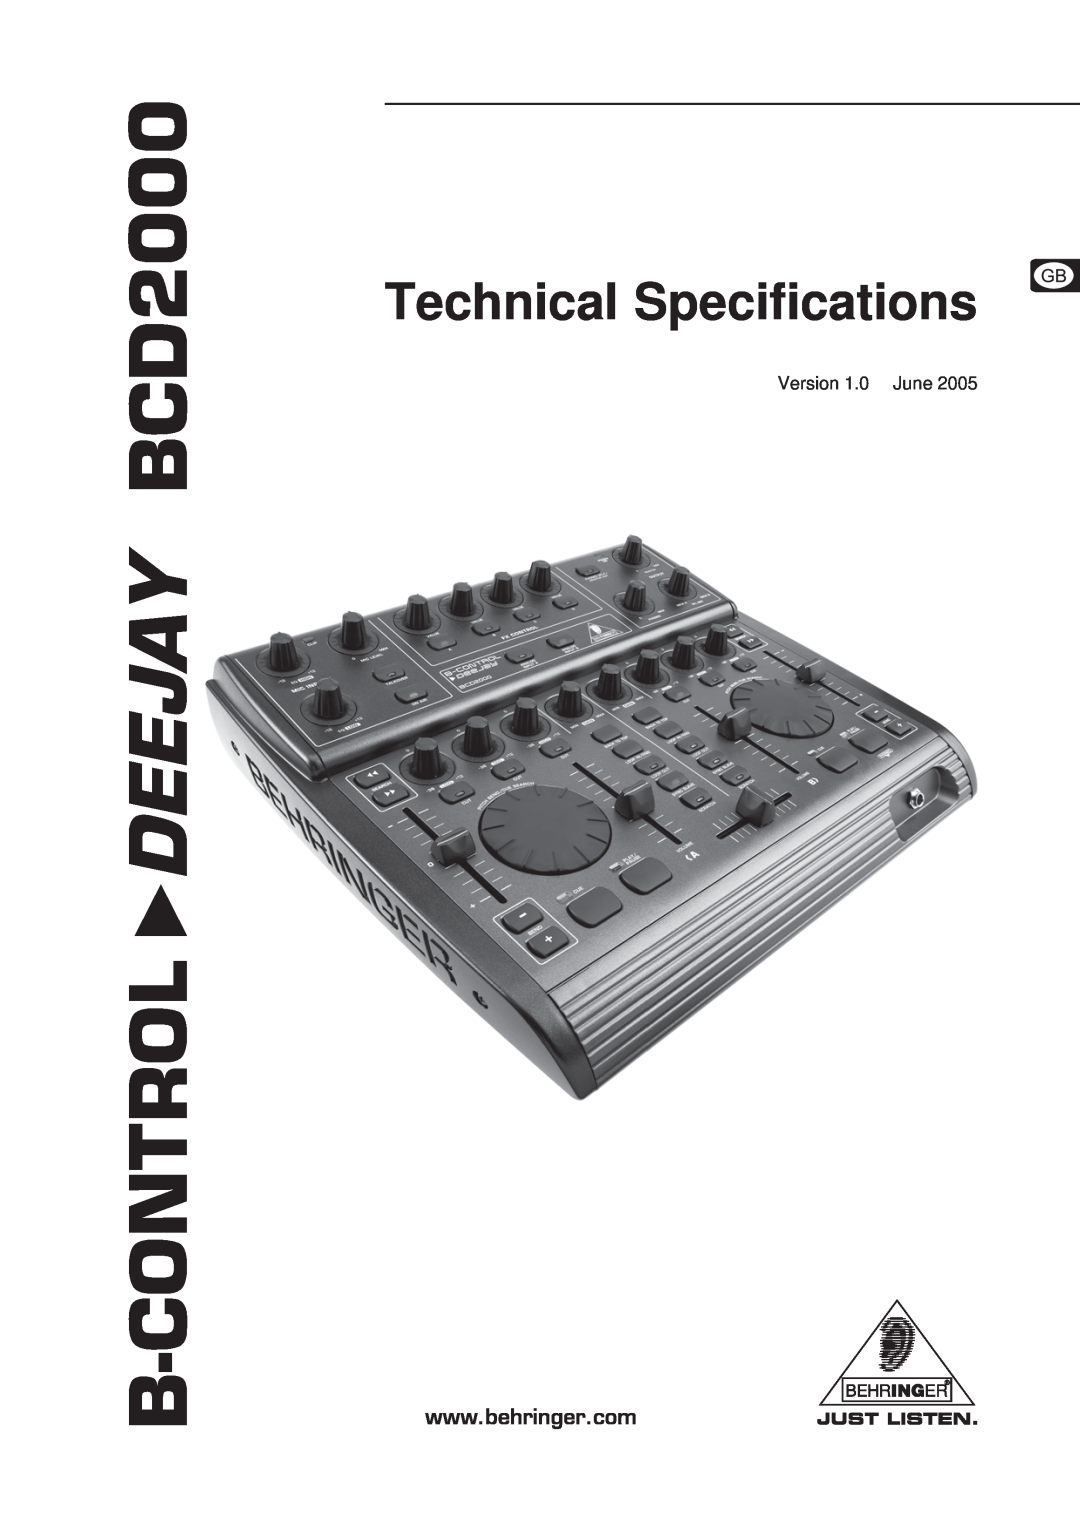 Behringer technical specifications DEEJAY BCD2000, B-Control, Technical Specifications 